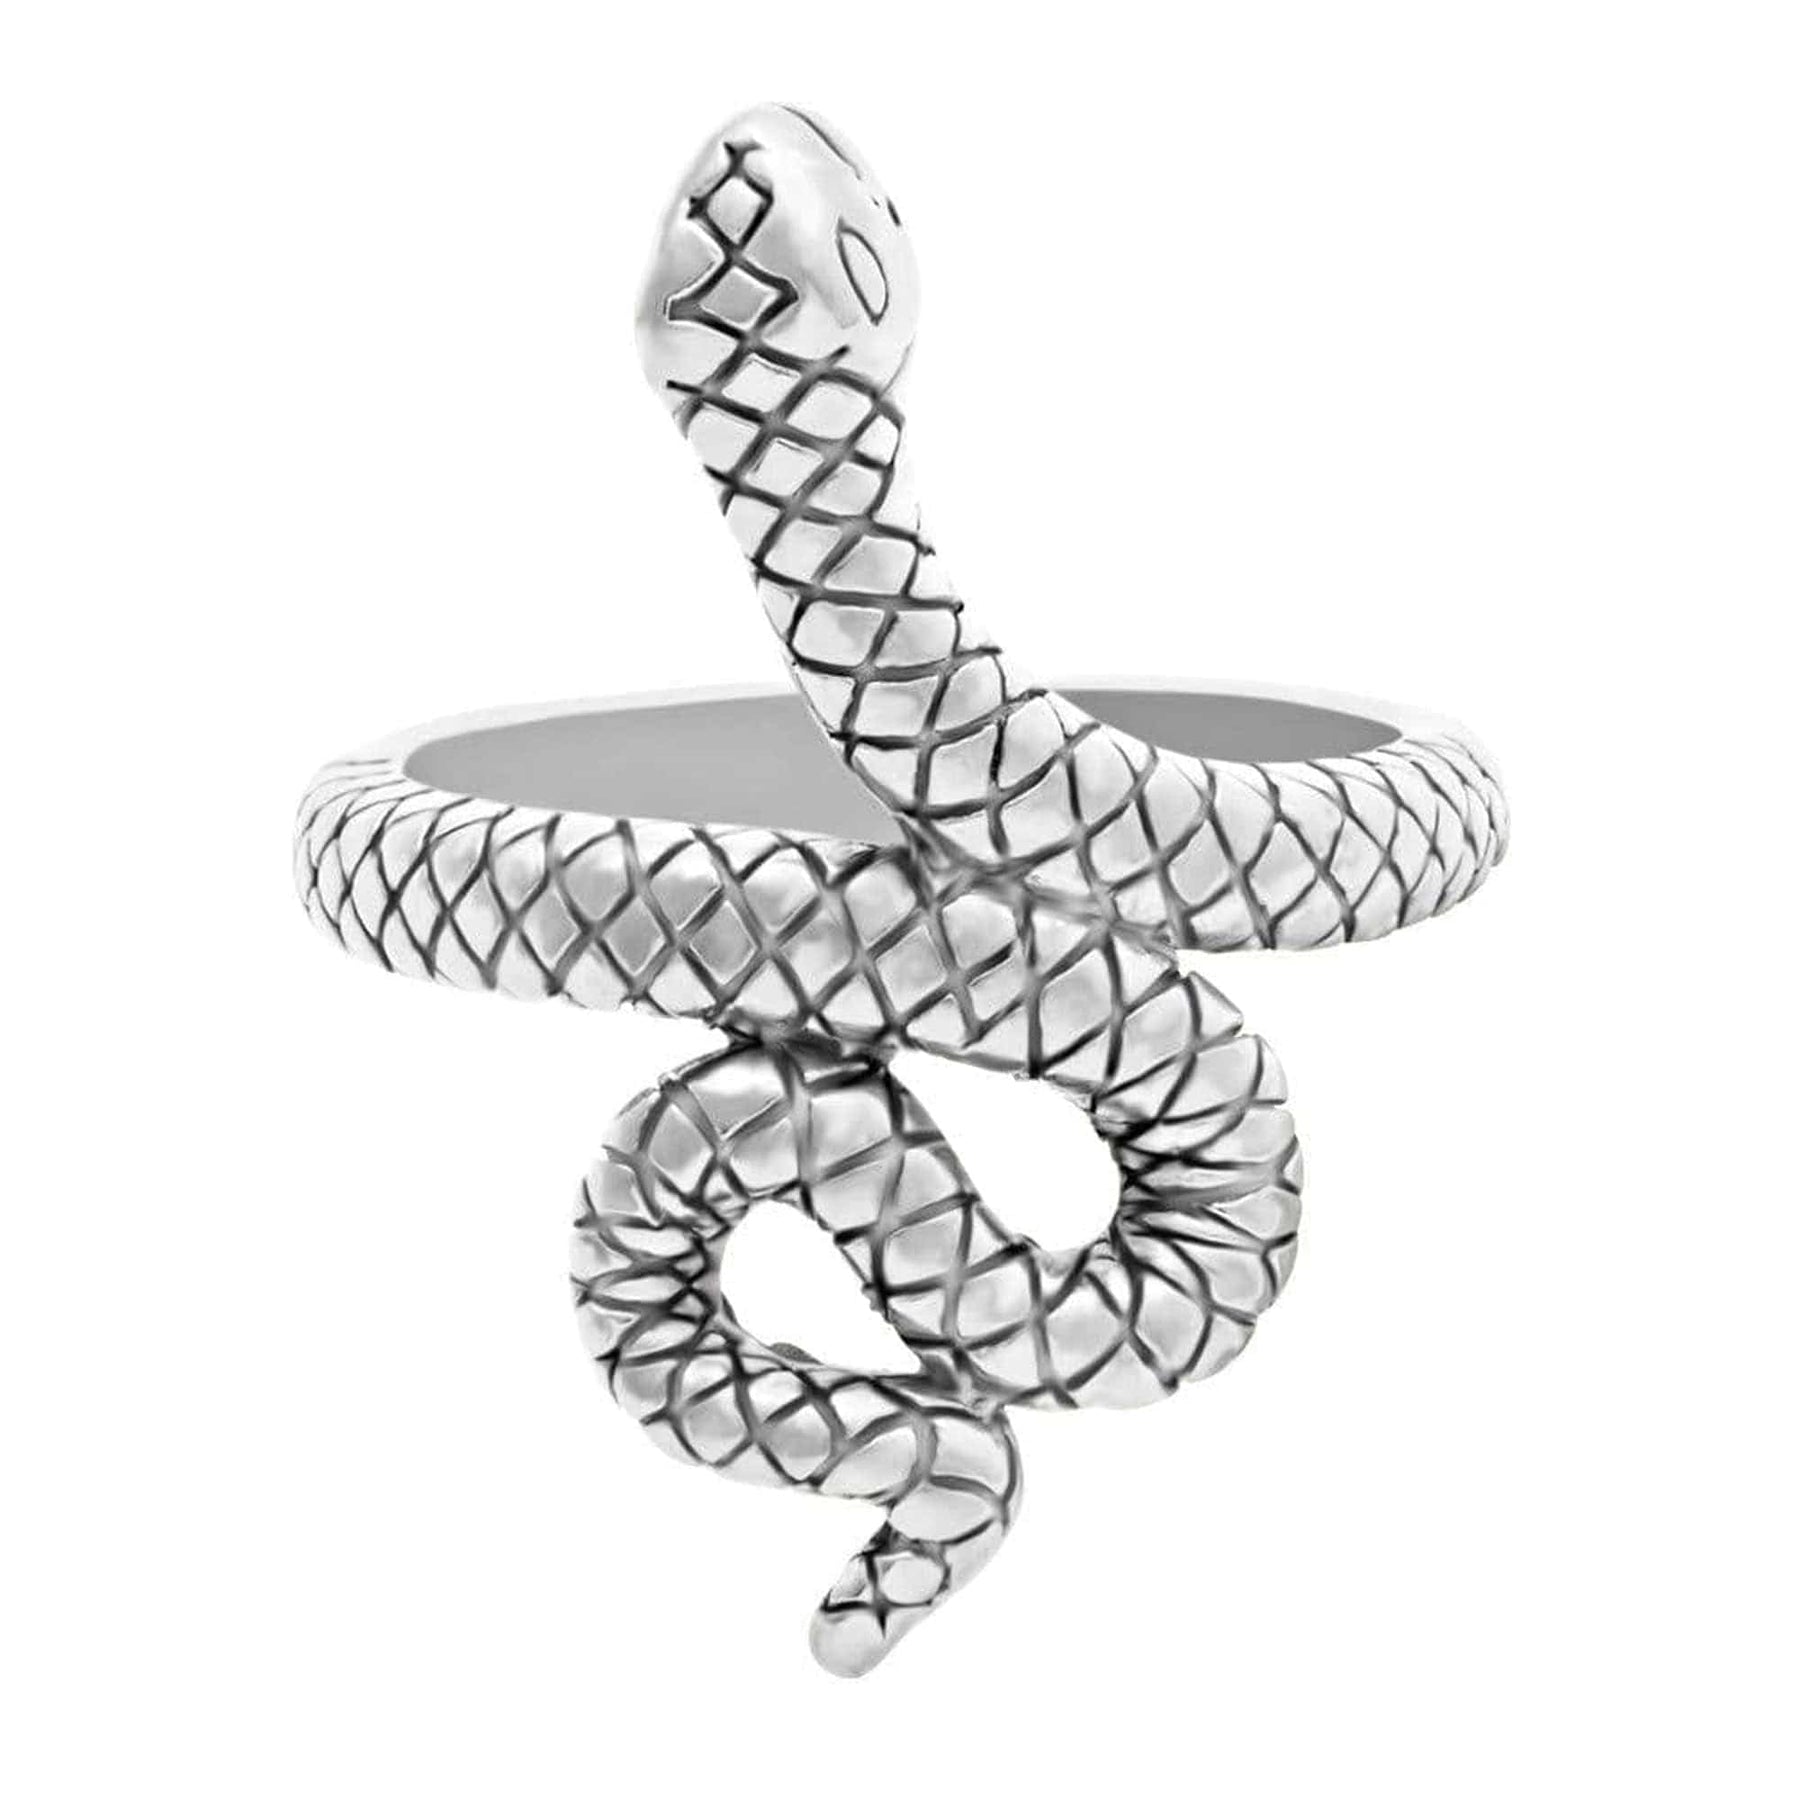 BohoMoon Stainless Steel Snake Charmer Ring Silver / US 6 / UK L / EUR 51 (small)